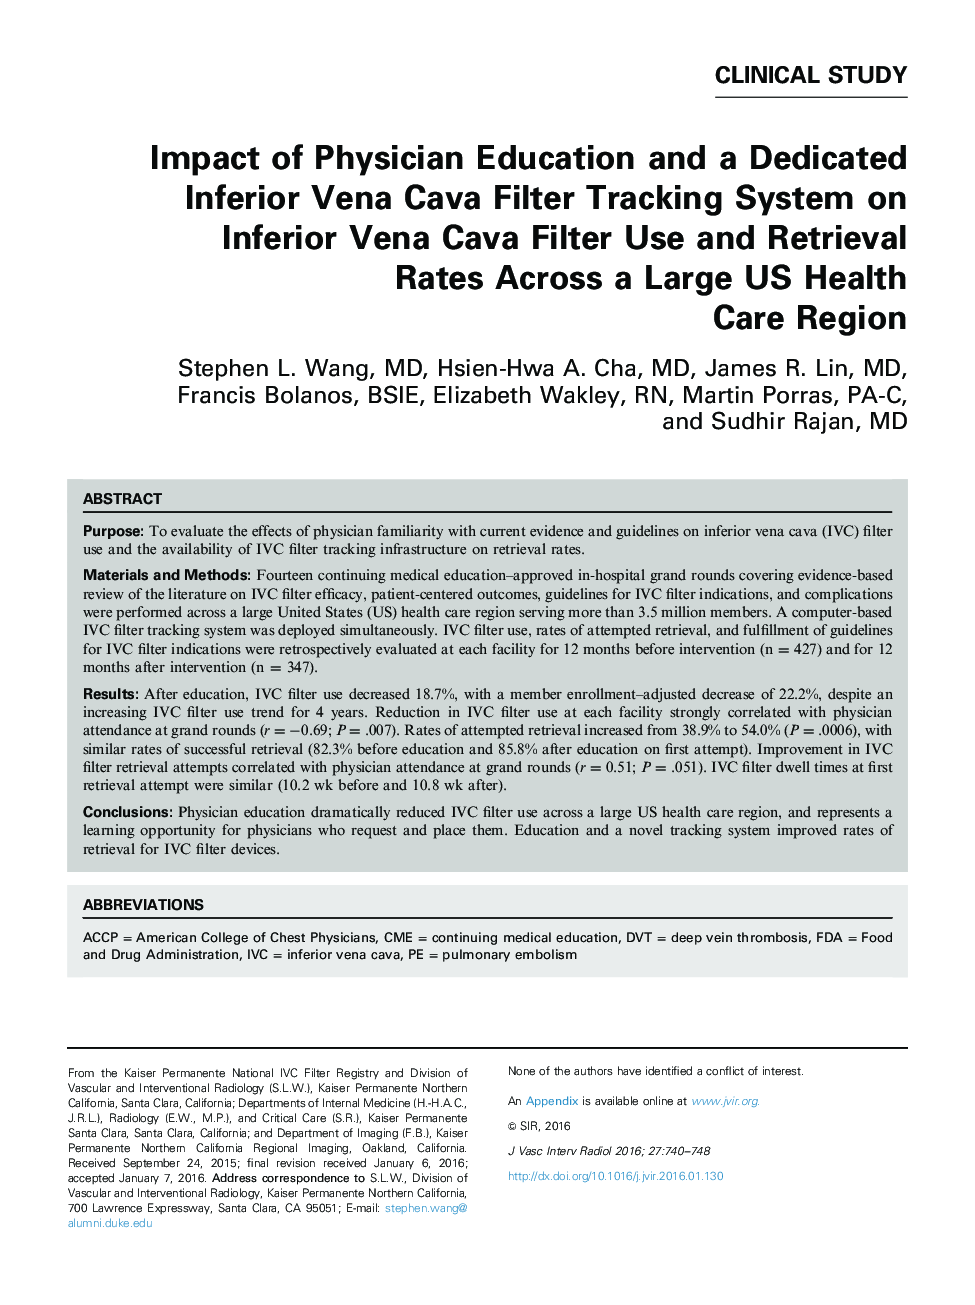 Impact of Physician Education and a Dedicated Inferior Vena Cava Filter Tracking System on Inferior Vena Cava Filter Use and Retrieval Rates Across a Large US Health Care Region